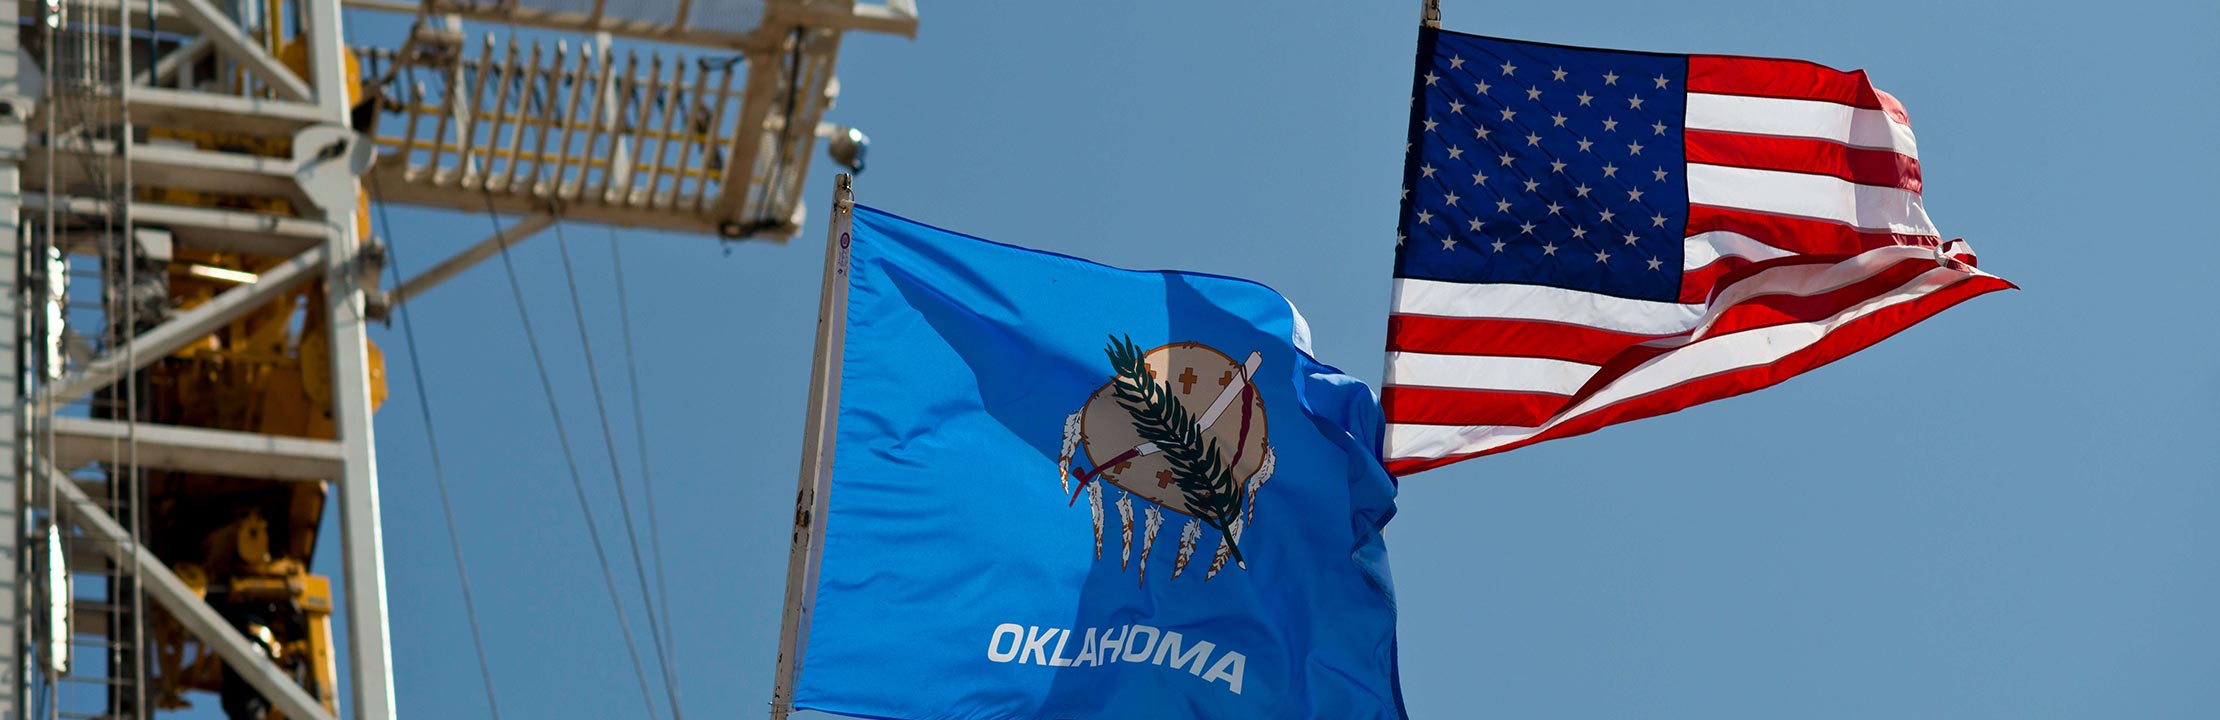 United States and Oklahoma flags waving near oil rigging